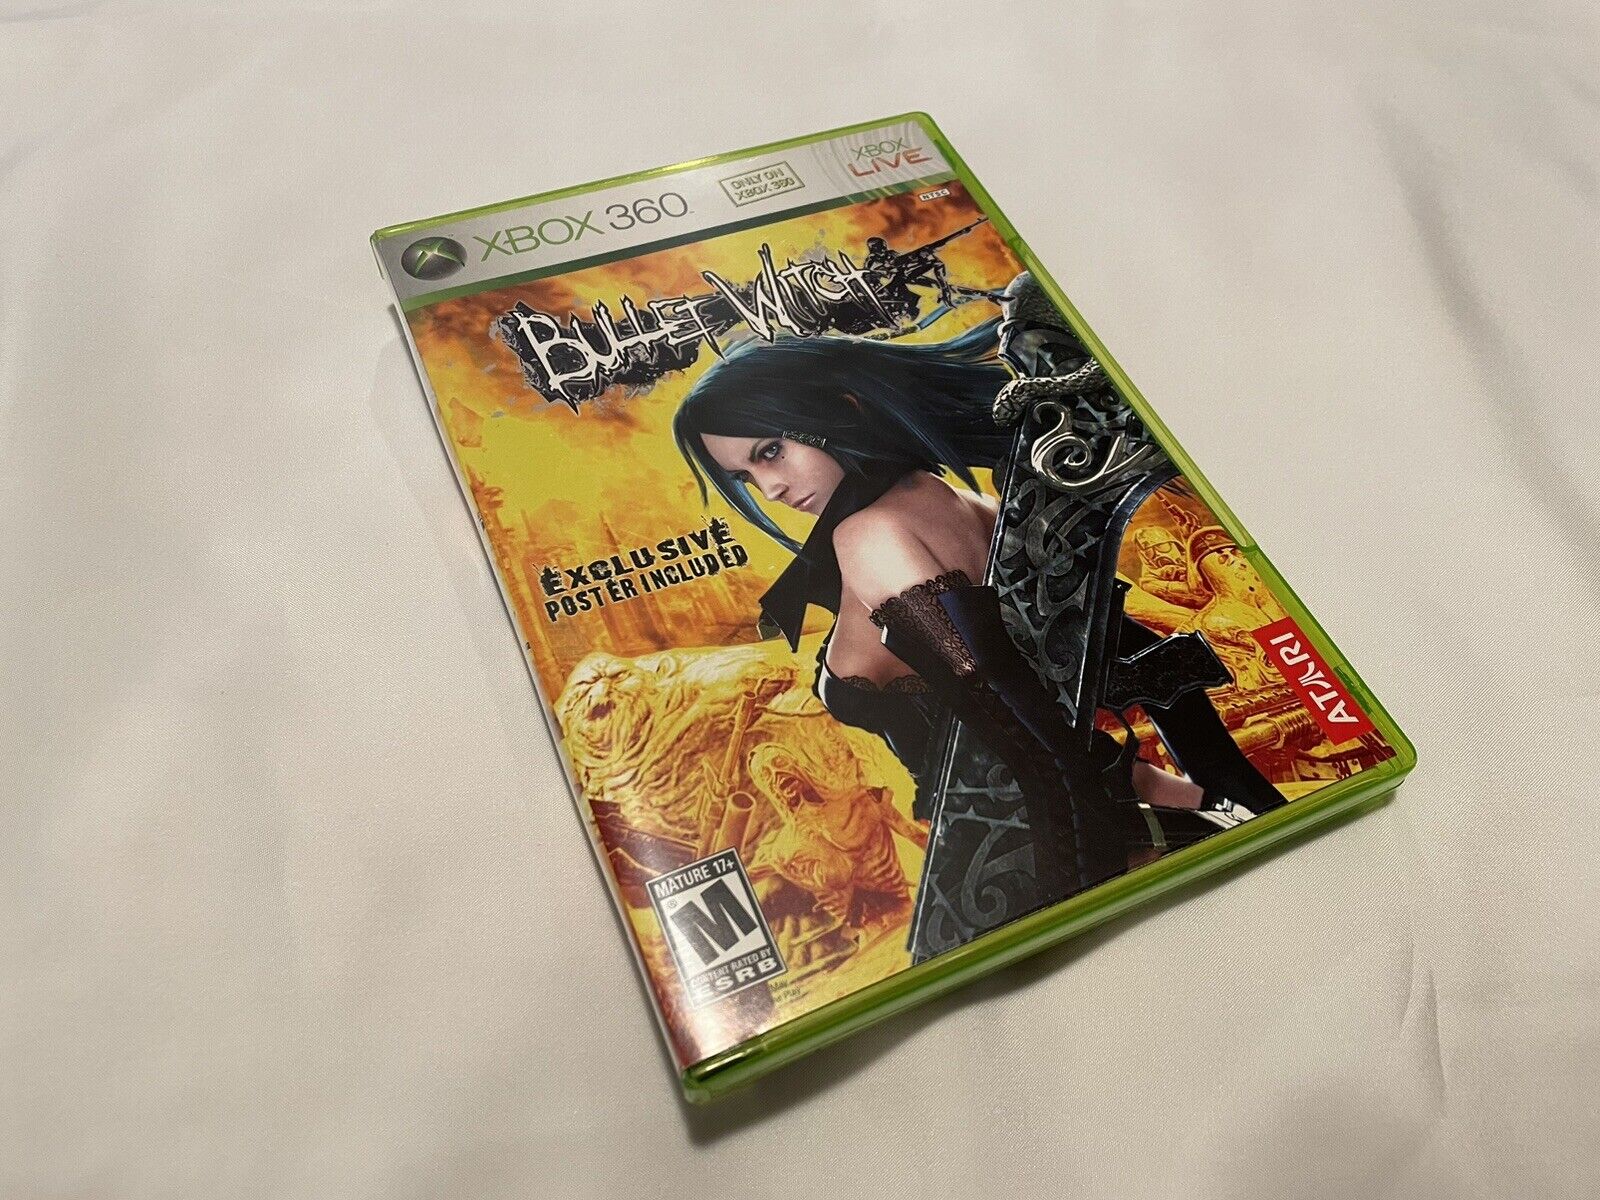 Bullet Witch Xbox 360 Complete CIB w/ Poster - Rare EXCELLENT